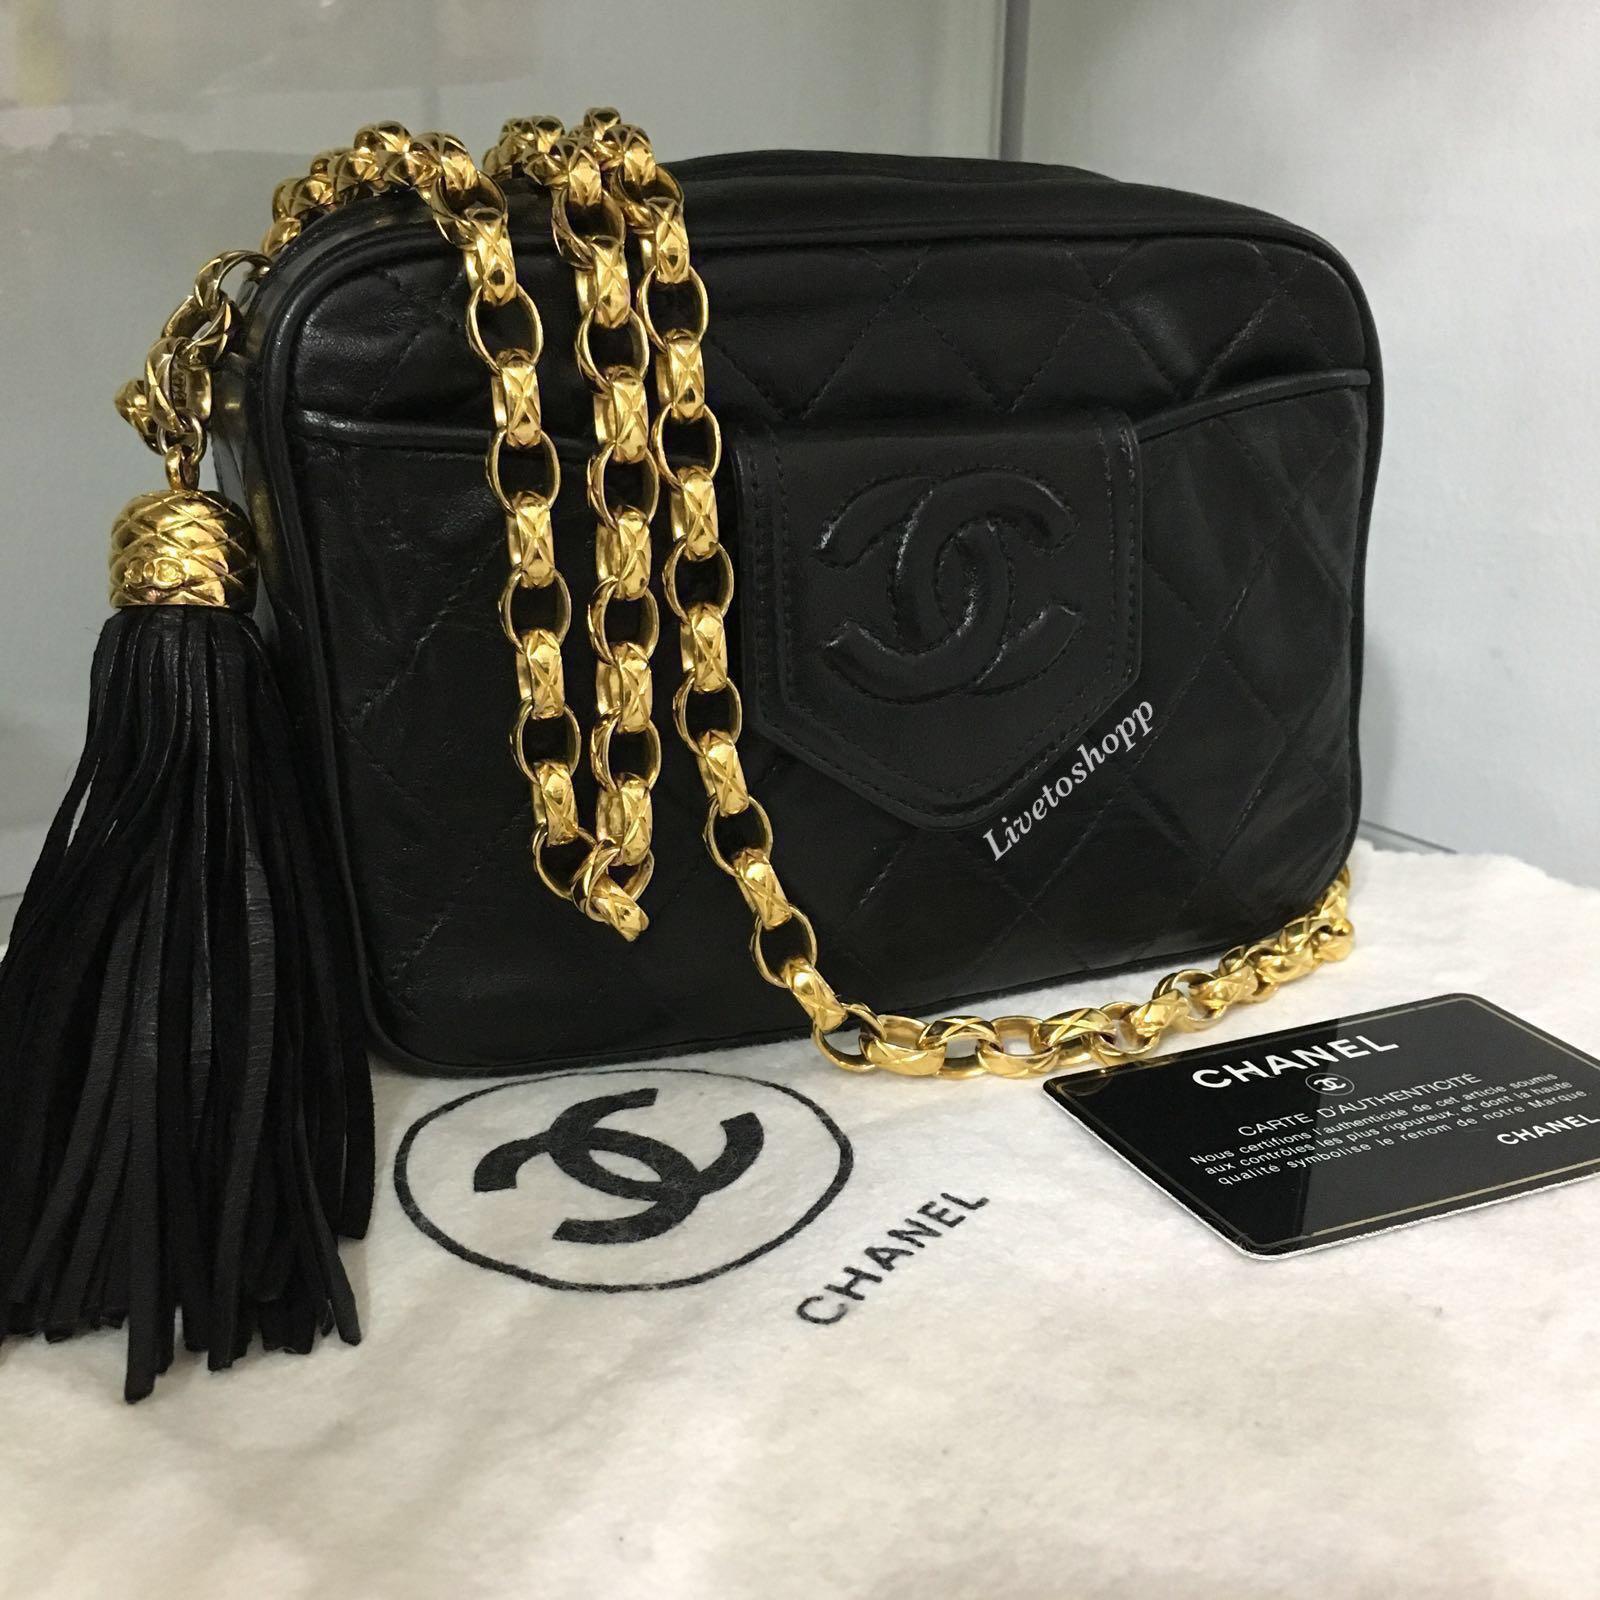 Chanel Camera Bag with 24k Gold Plated Tassel and Bijoux Chain